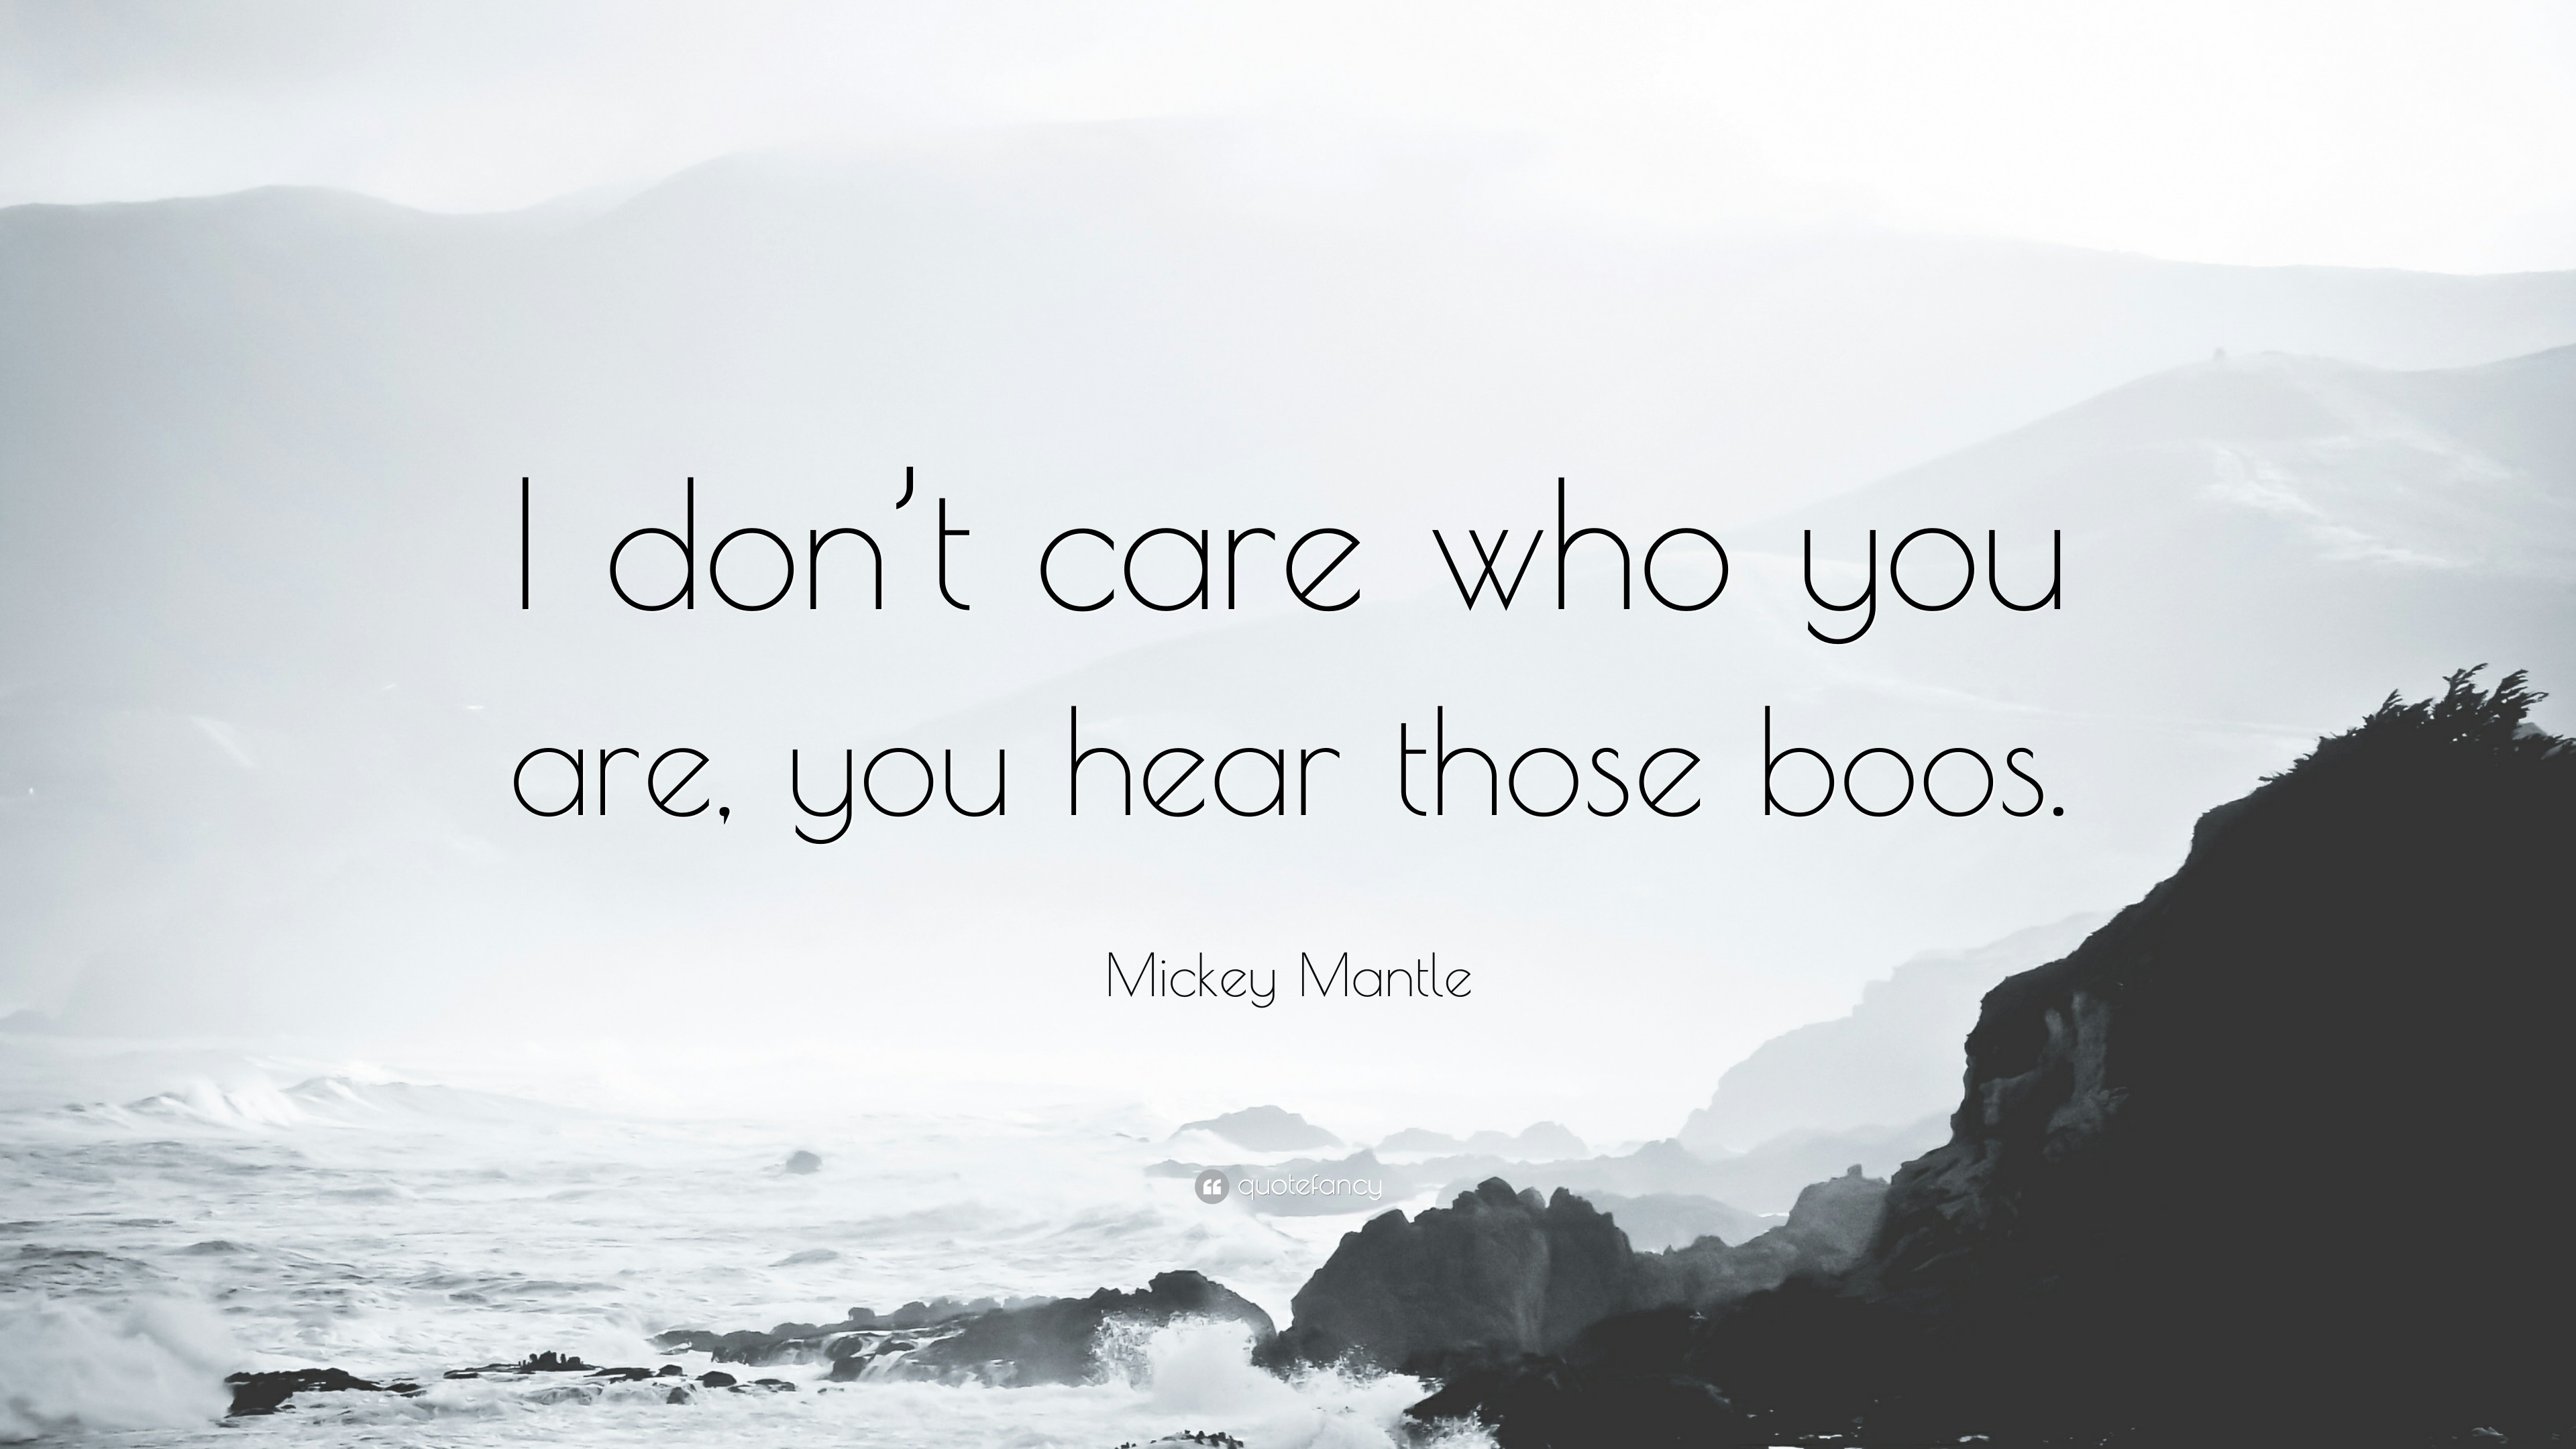 3840x2160 Mickey Mantle Quote: “I don't care who you are, you hear